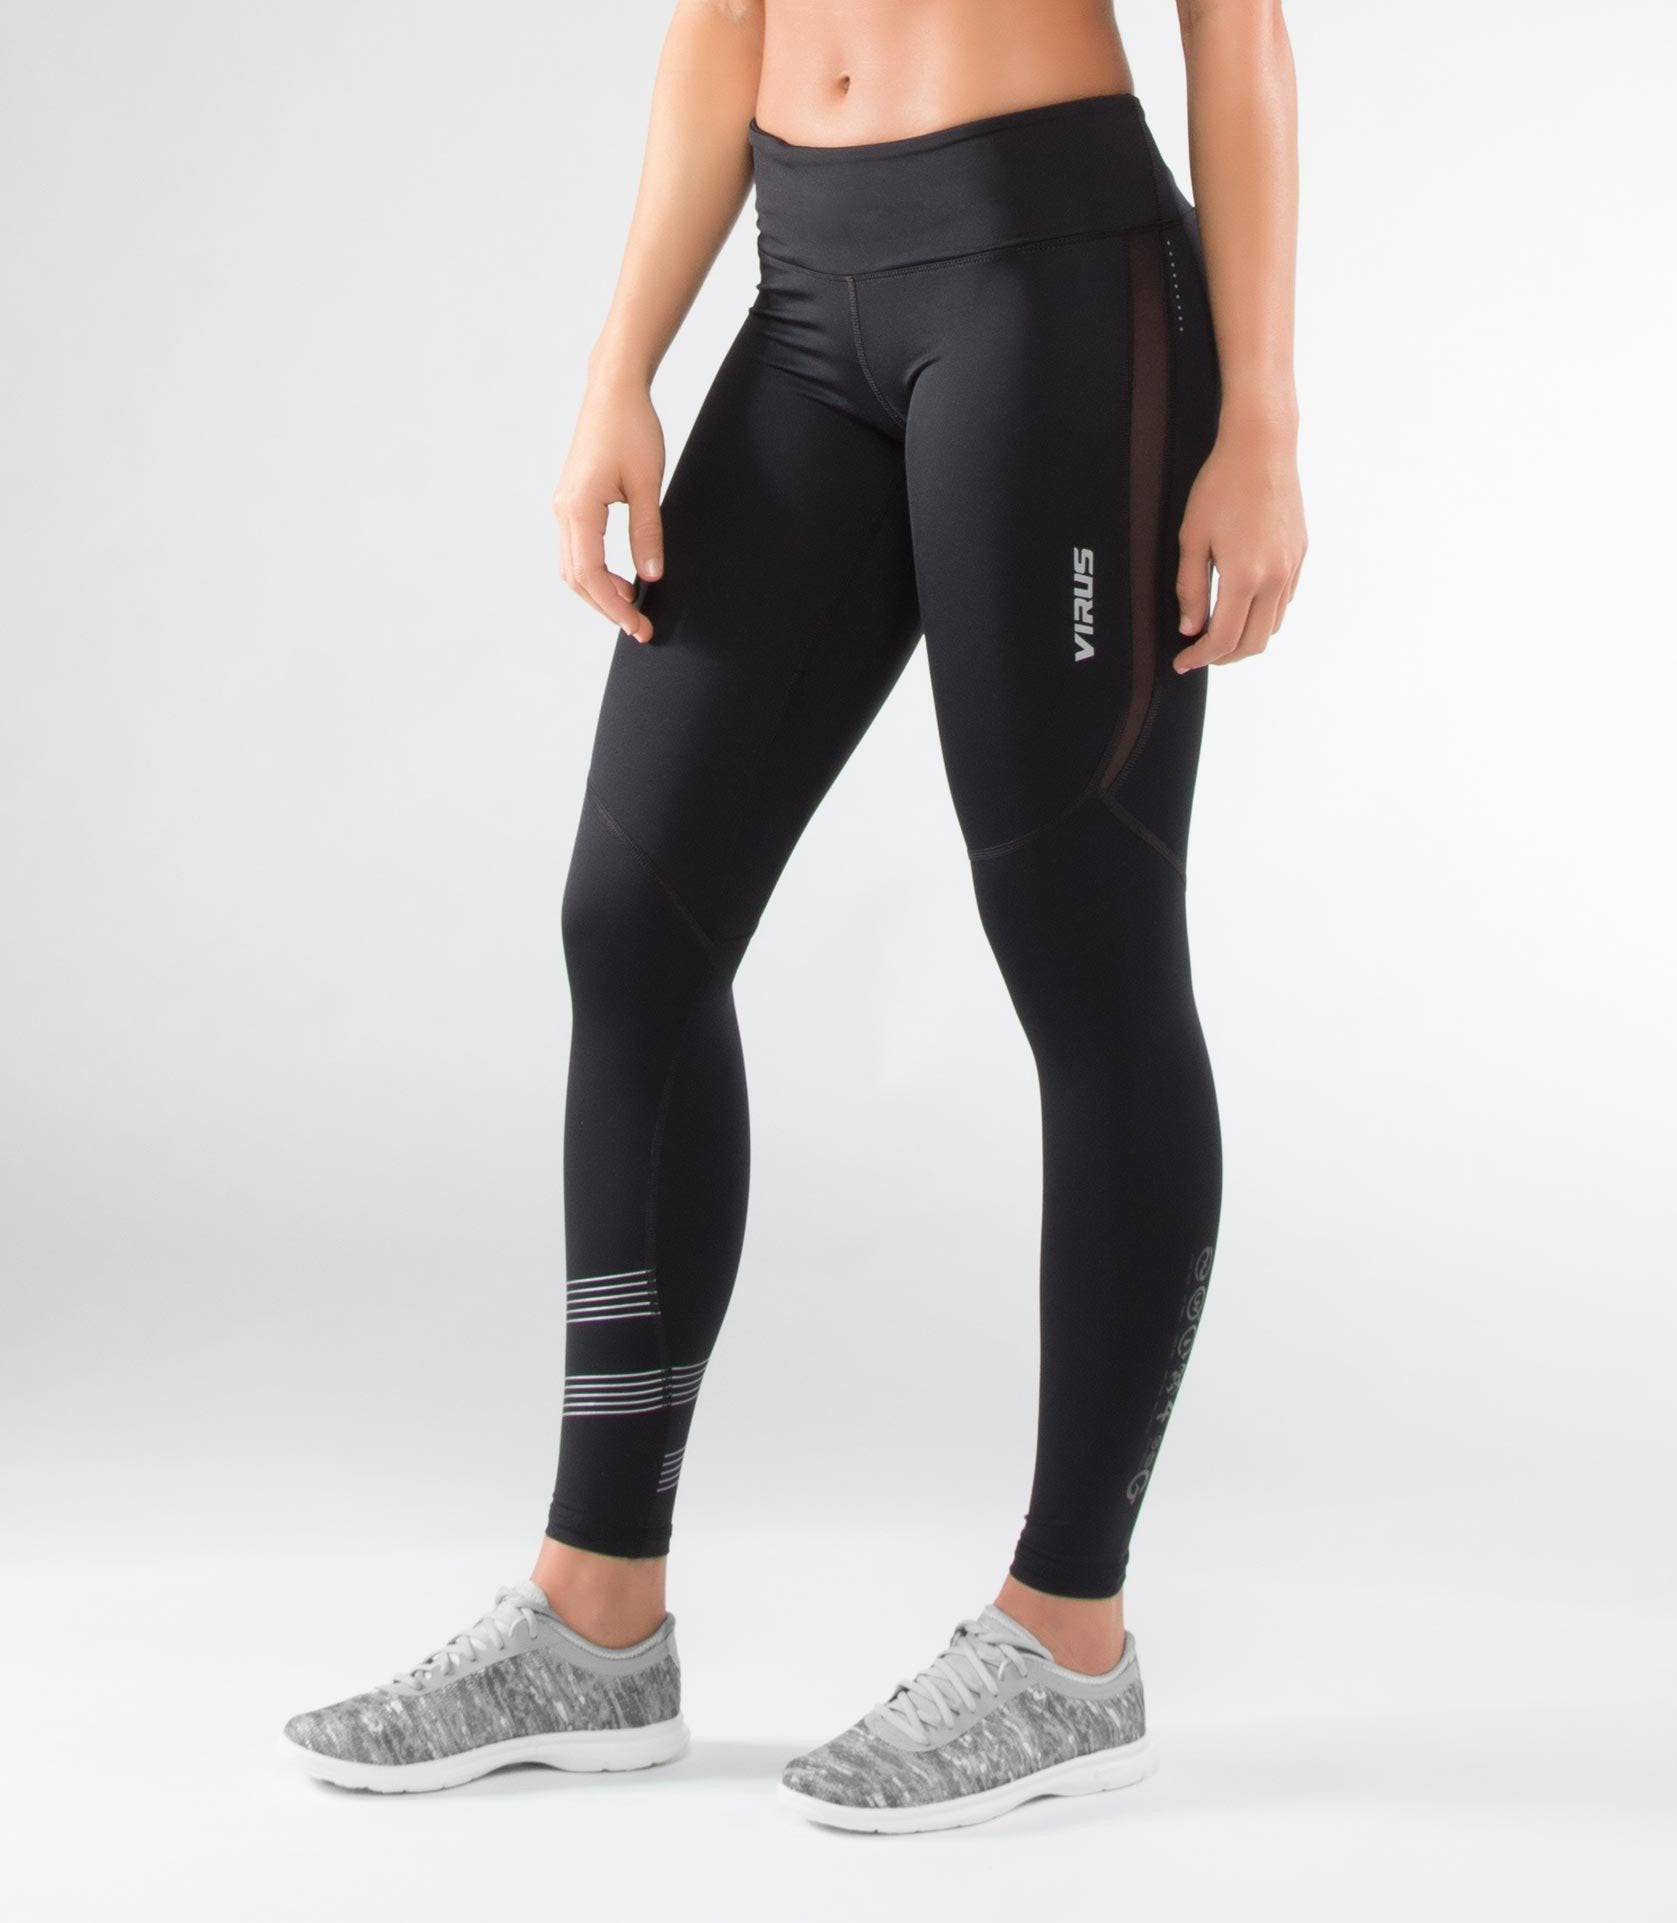 Virus | ECO33 Stay Cool Mesh Pant - XTC Fitness - Exercise Equipment Superstore - Canada - Pants